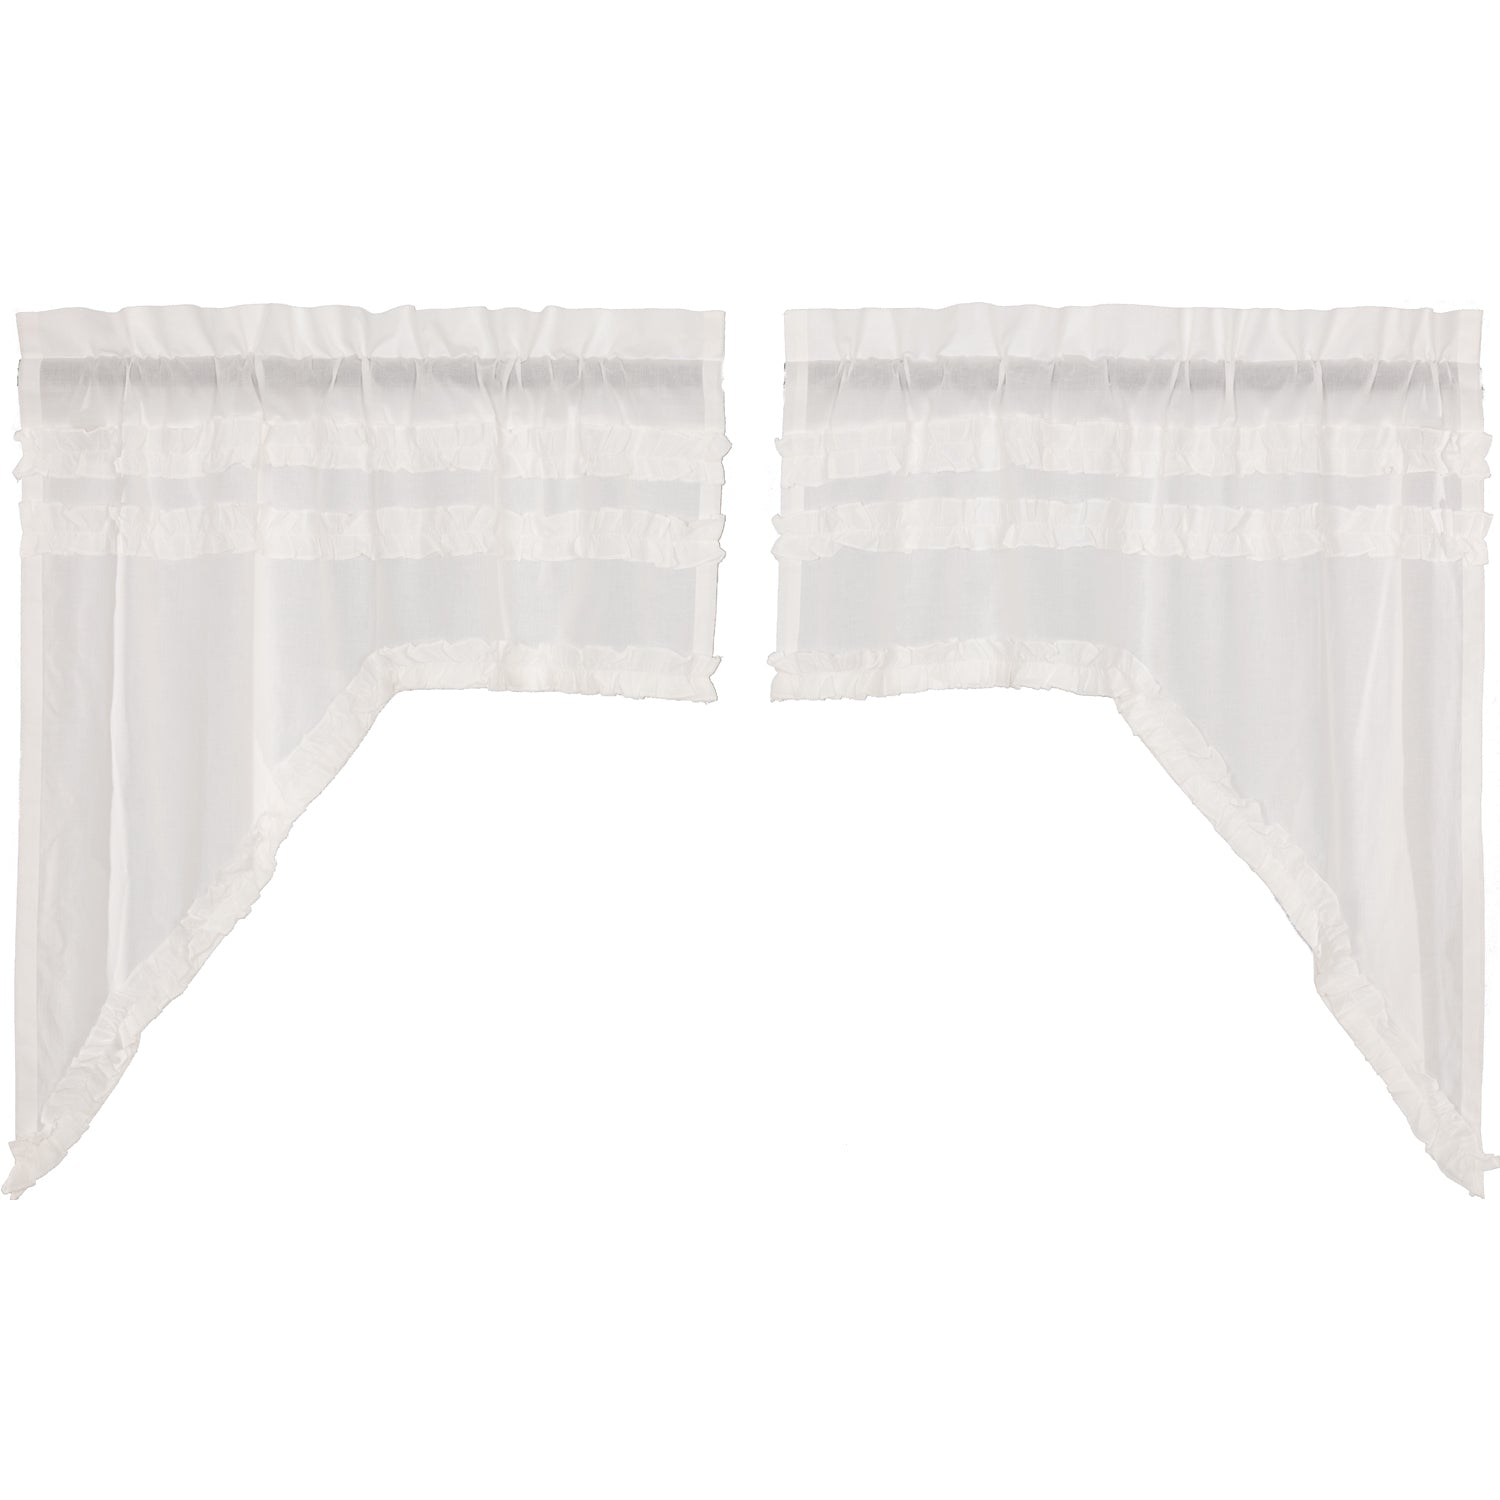 April & Olive White Ruffled Sheer Petticoat Swag Set of 2 36x36x16 By VHC Brands